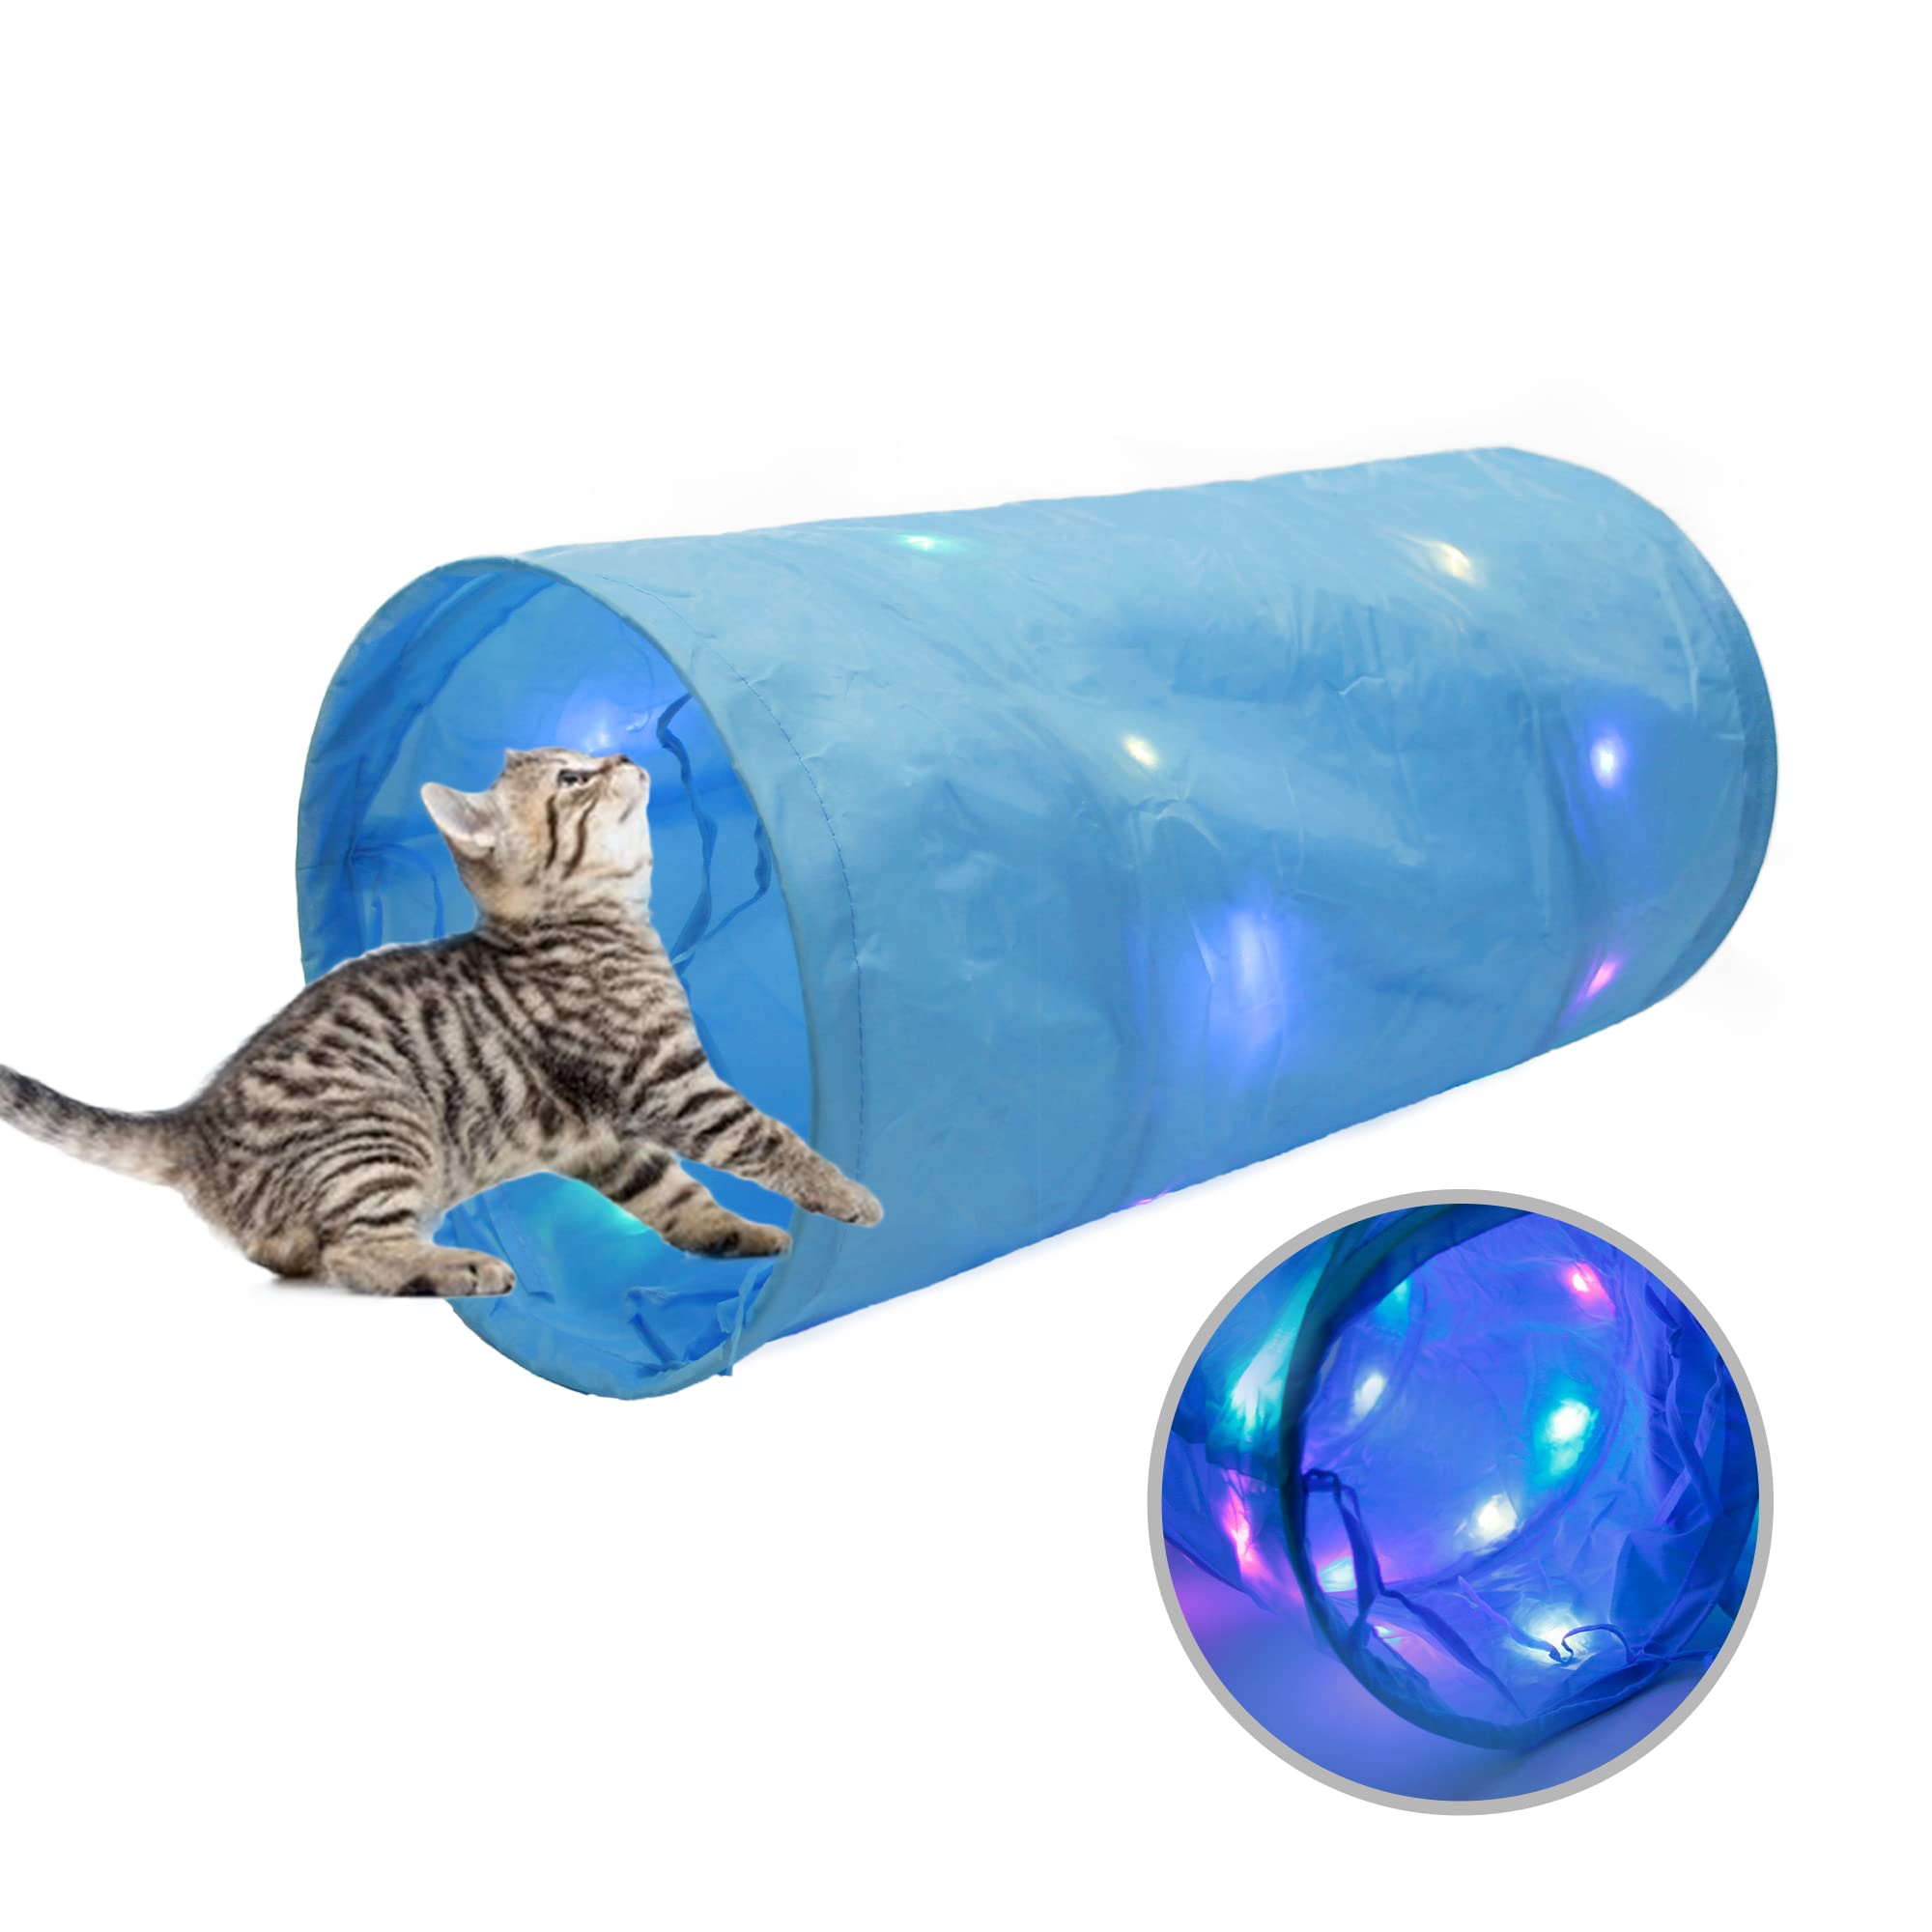 Cat tunnels with built-in LED lights